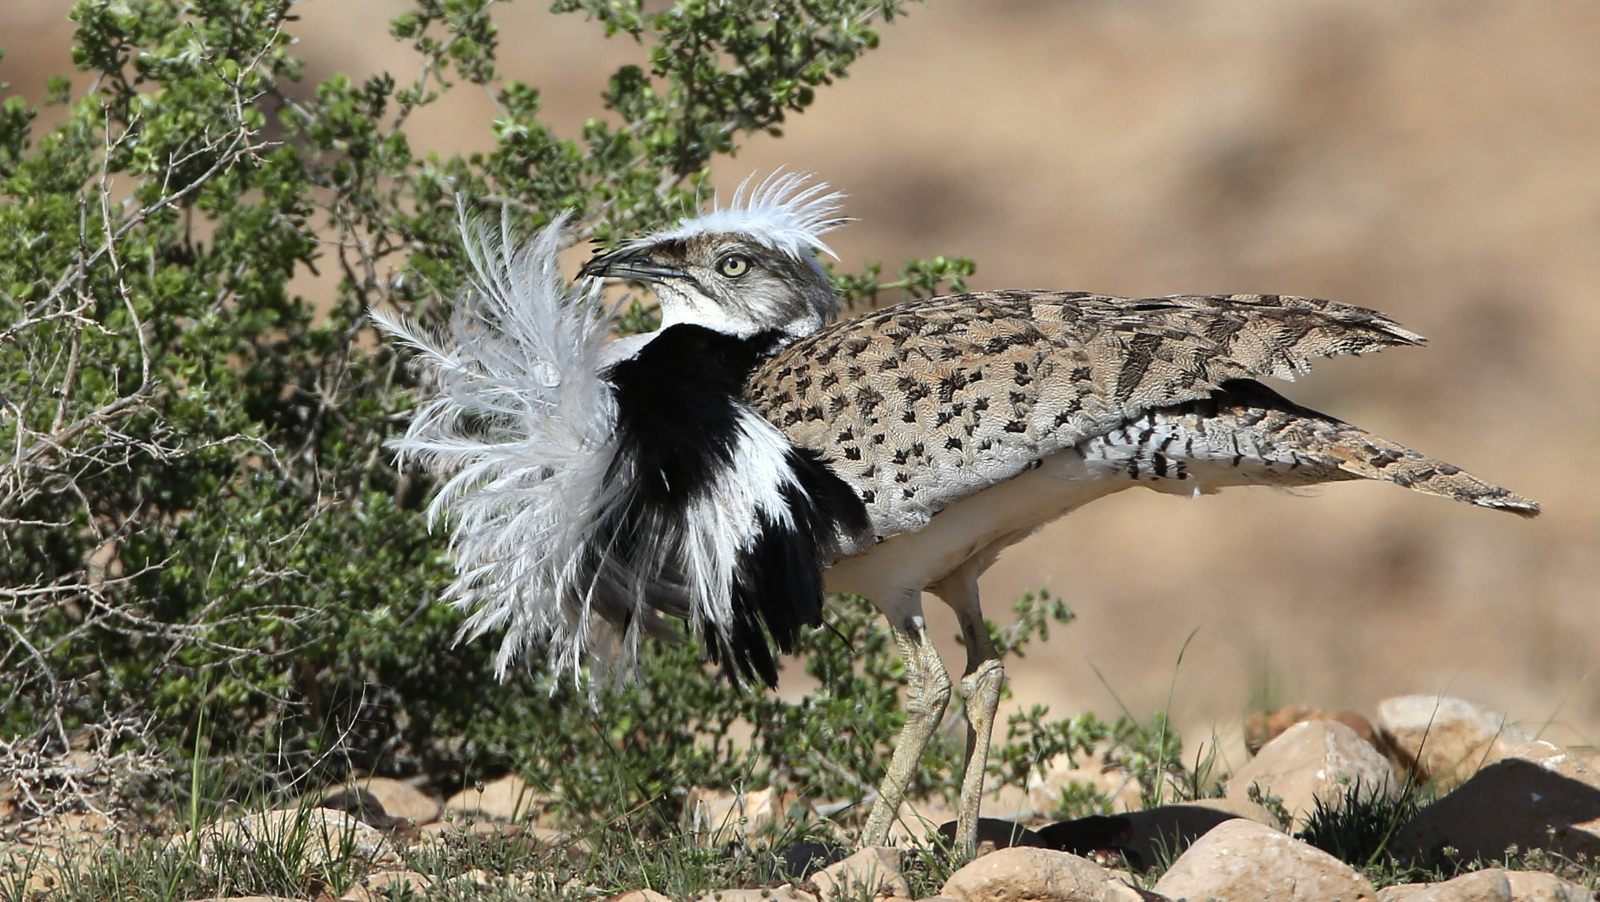 Israel, UAE give wing to preservation of rare desert bird - ISRAEL21c